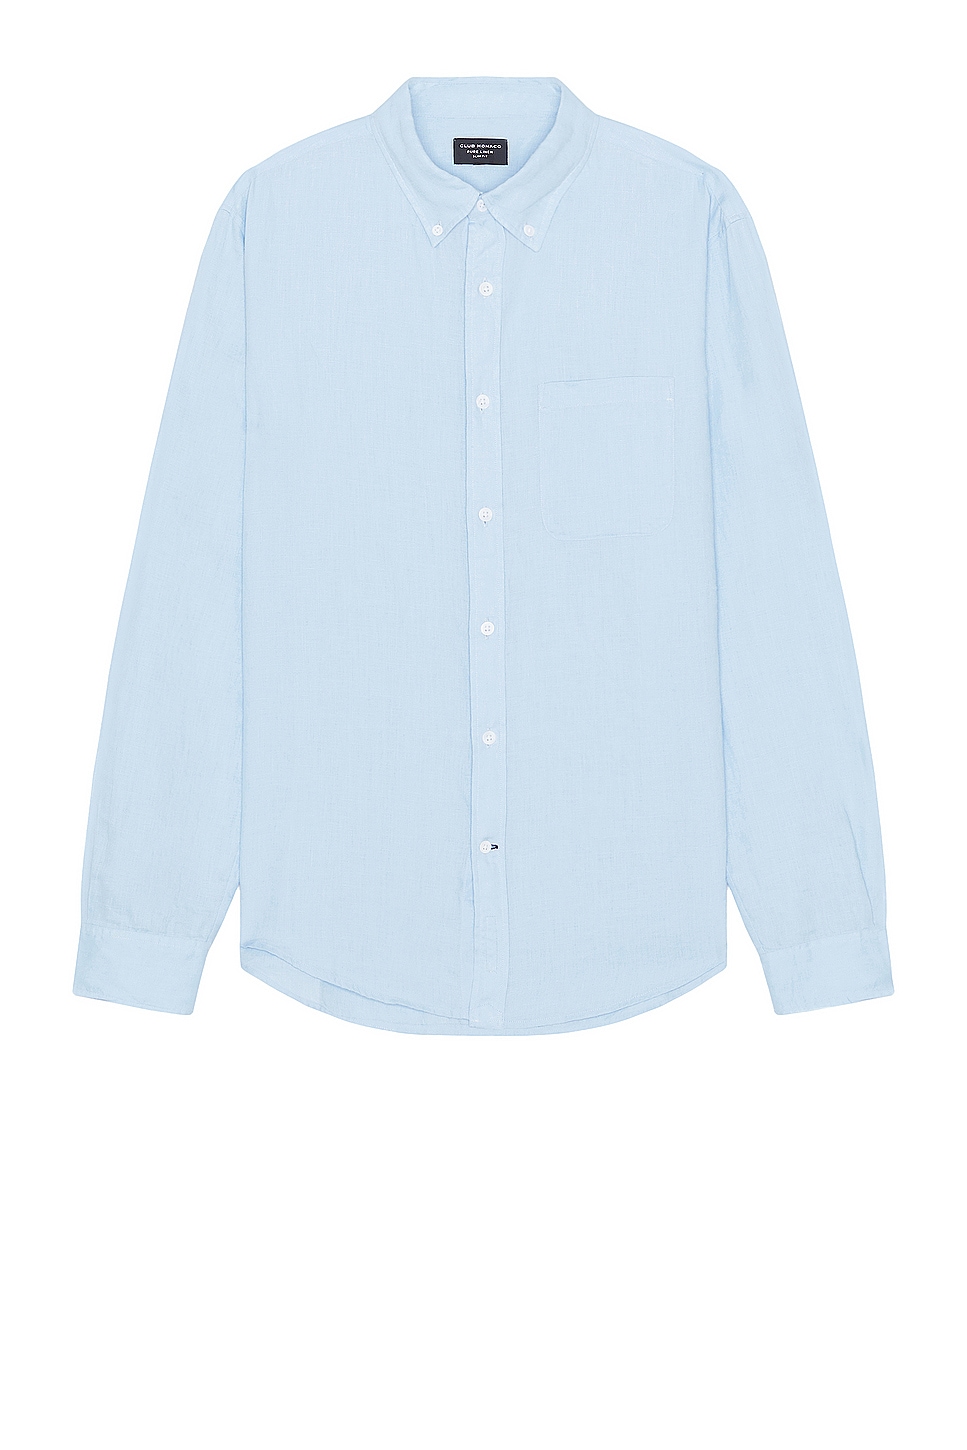 Image 1 of Club Monaco Long Sleeve Solid Linen Shirt in Light Blue Base